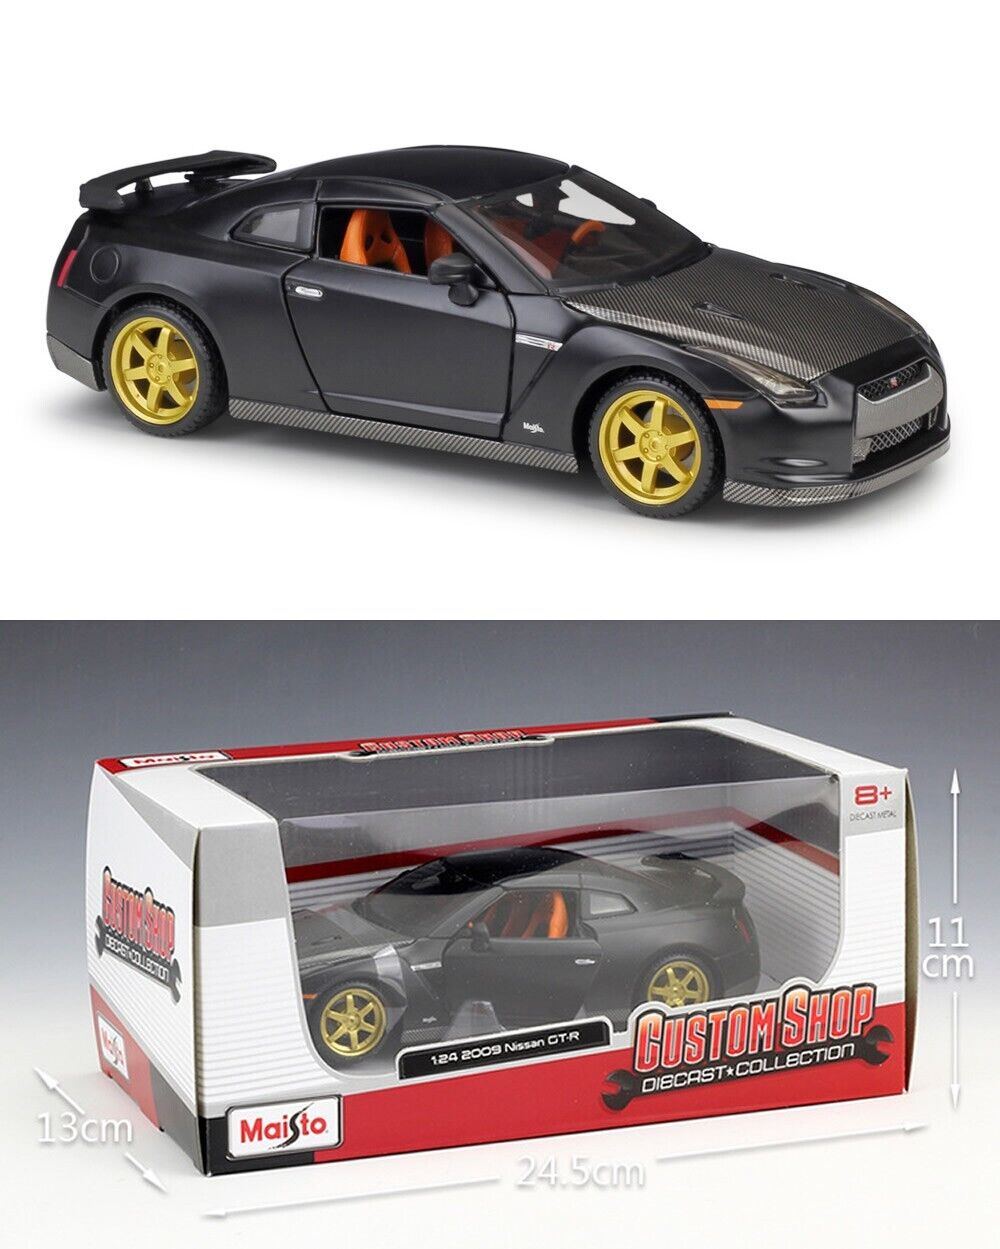 MAISTO 1:24 2009 Nissan GT-R Alloy Diecast Vehicle Car MODEL TOY Gift Collection